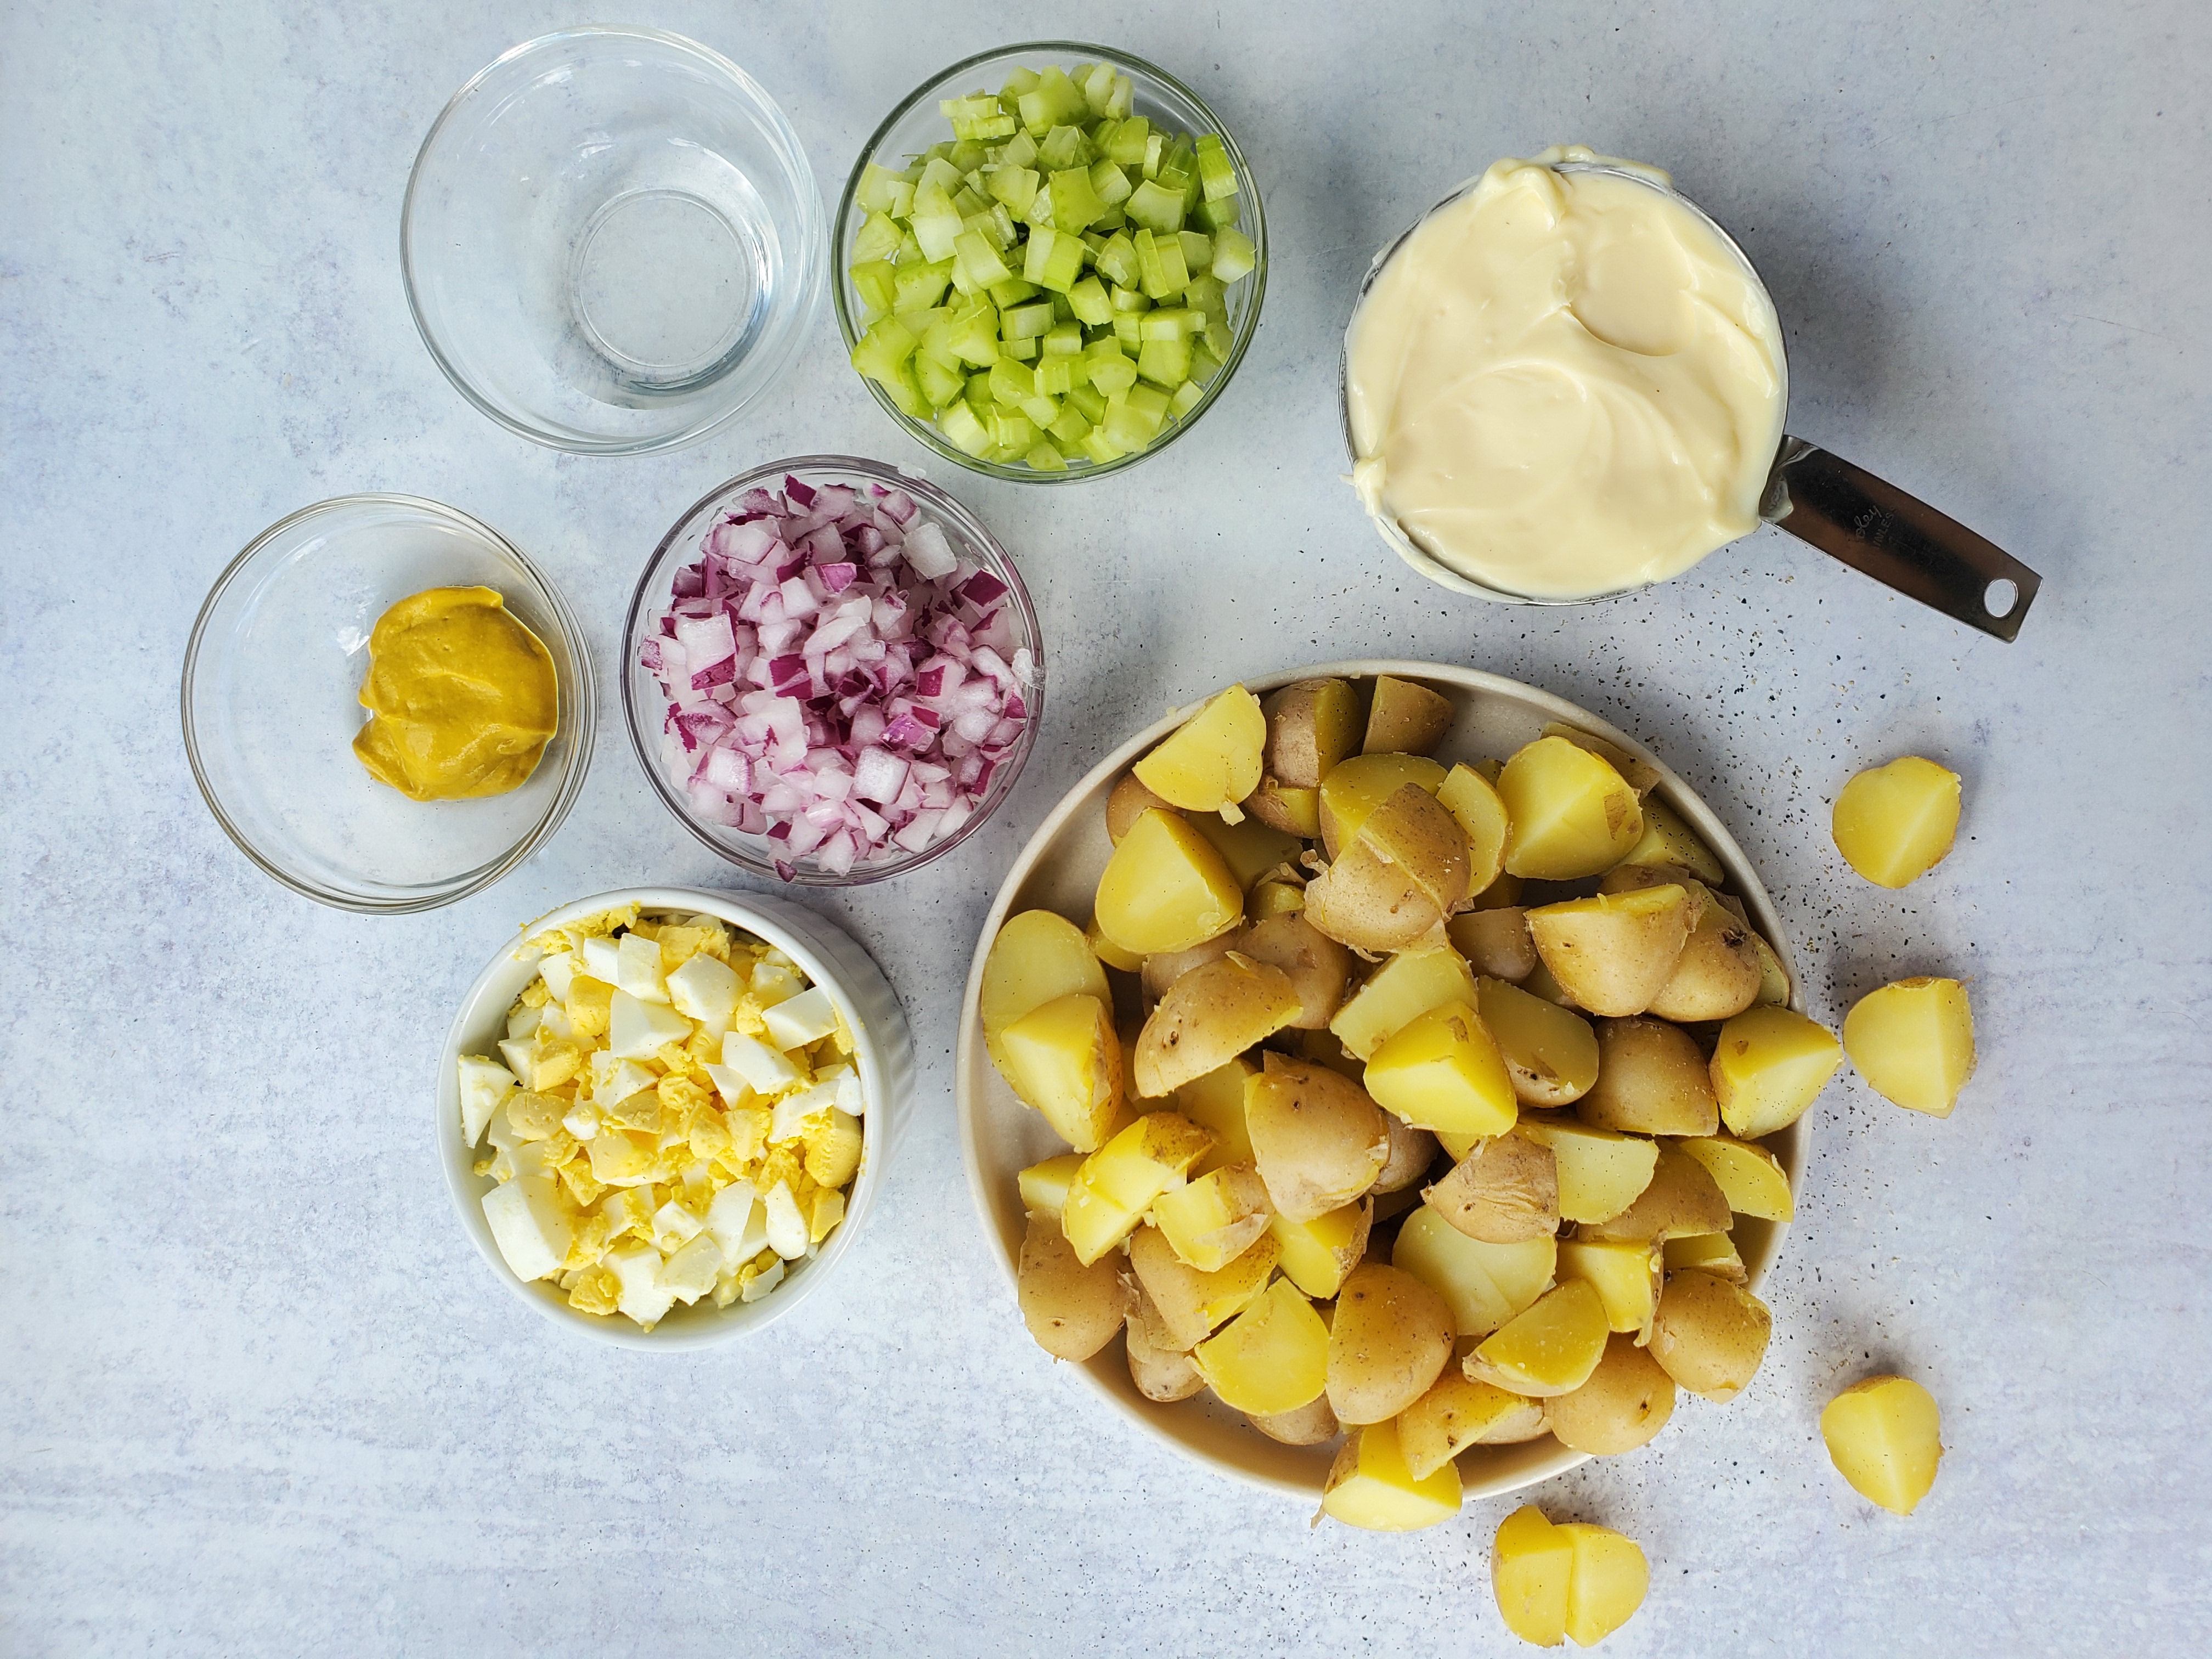 ingredients in a separate bowls for egg potato salad - potatoes, mayonnaise, celery, onion, hard-boiled egg, vinegar, mustard